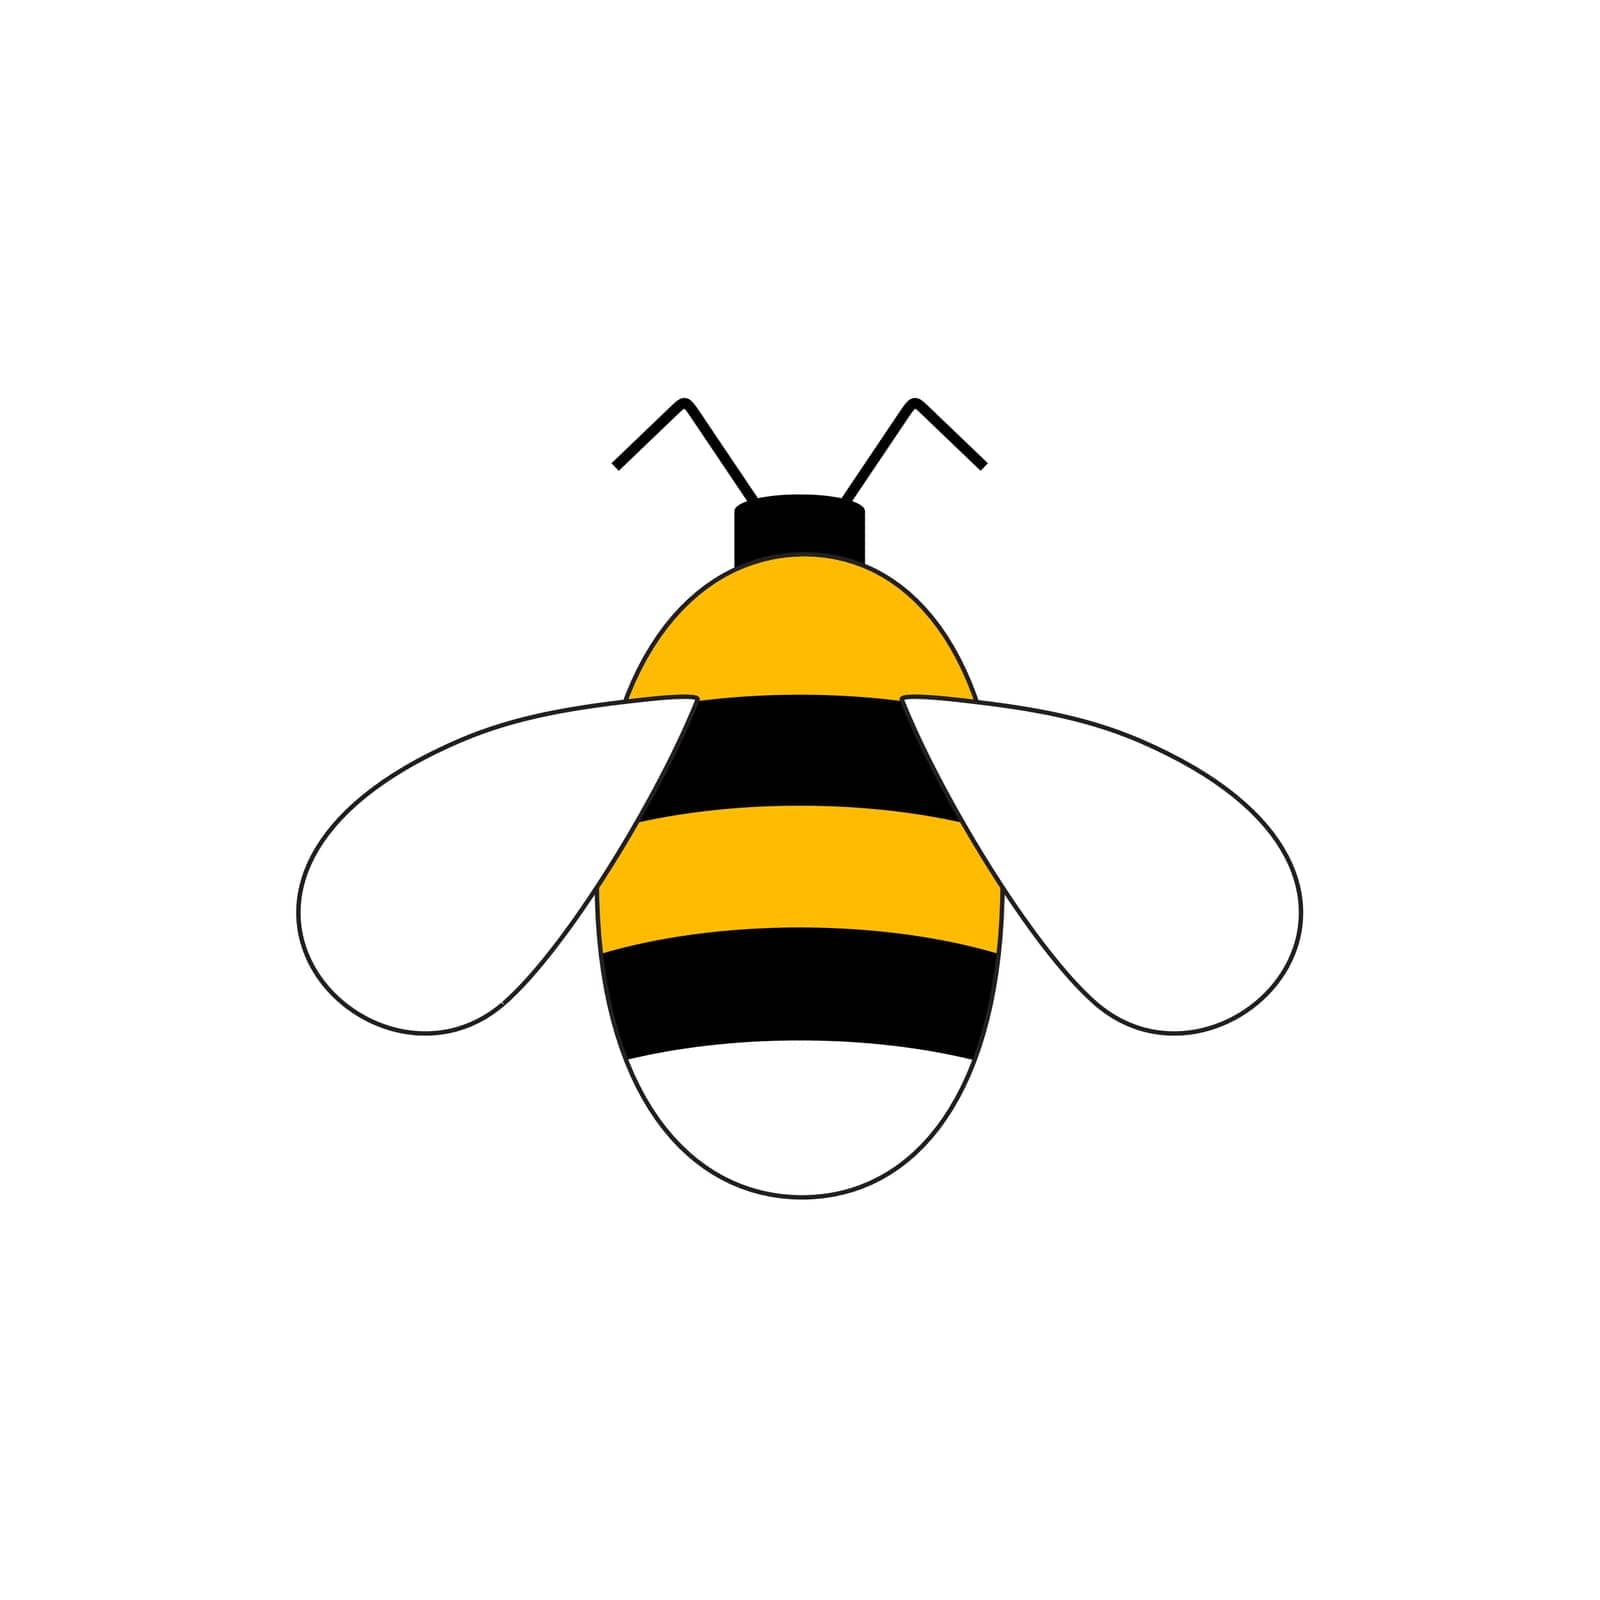 Bee concepts logo vector graphic abstract template.